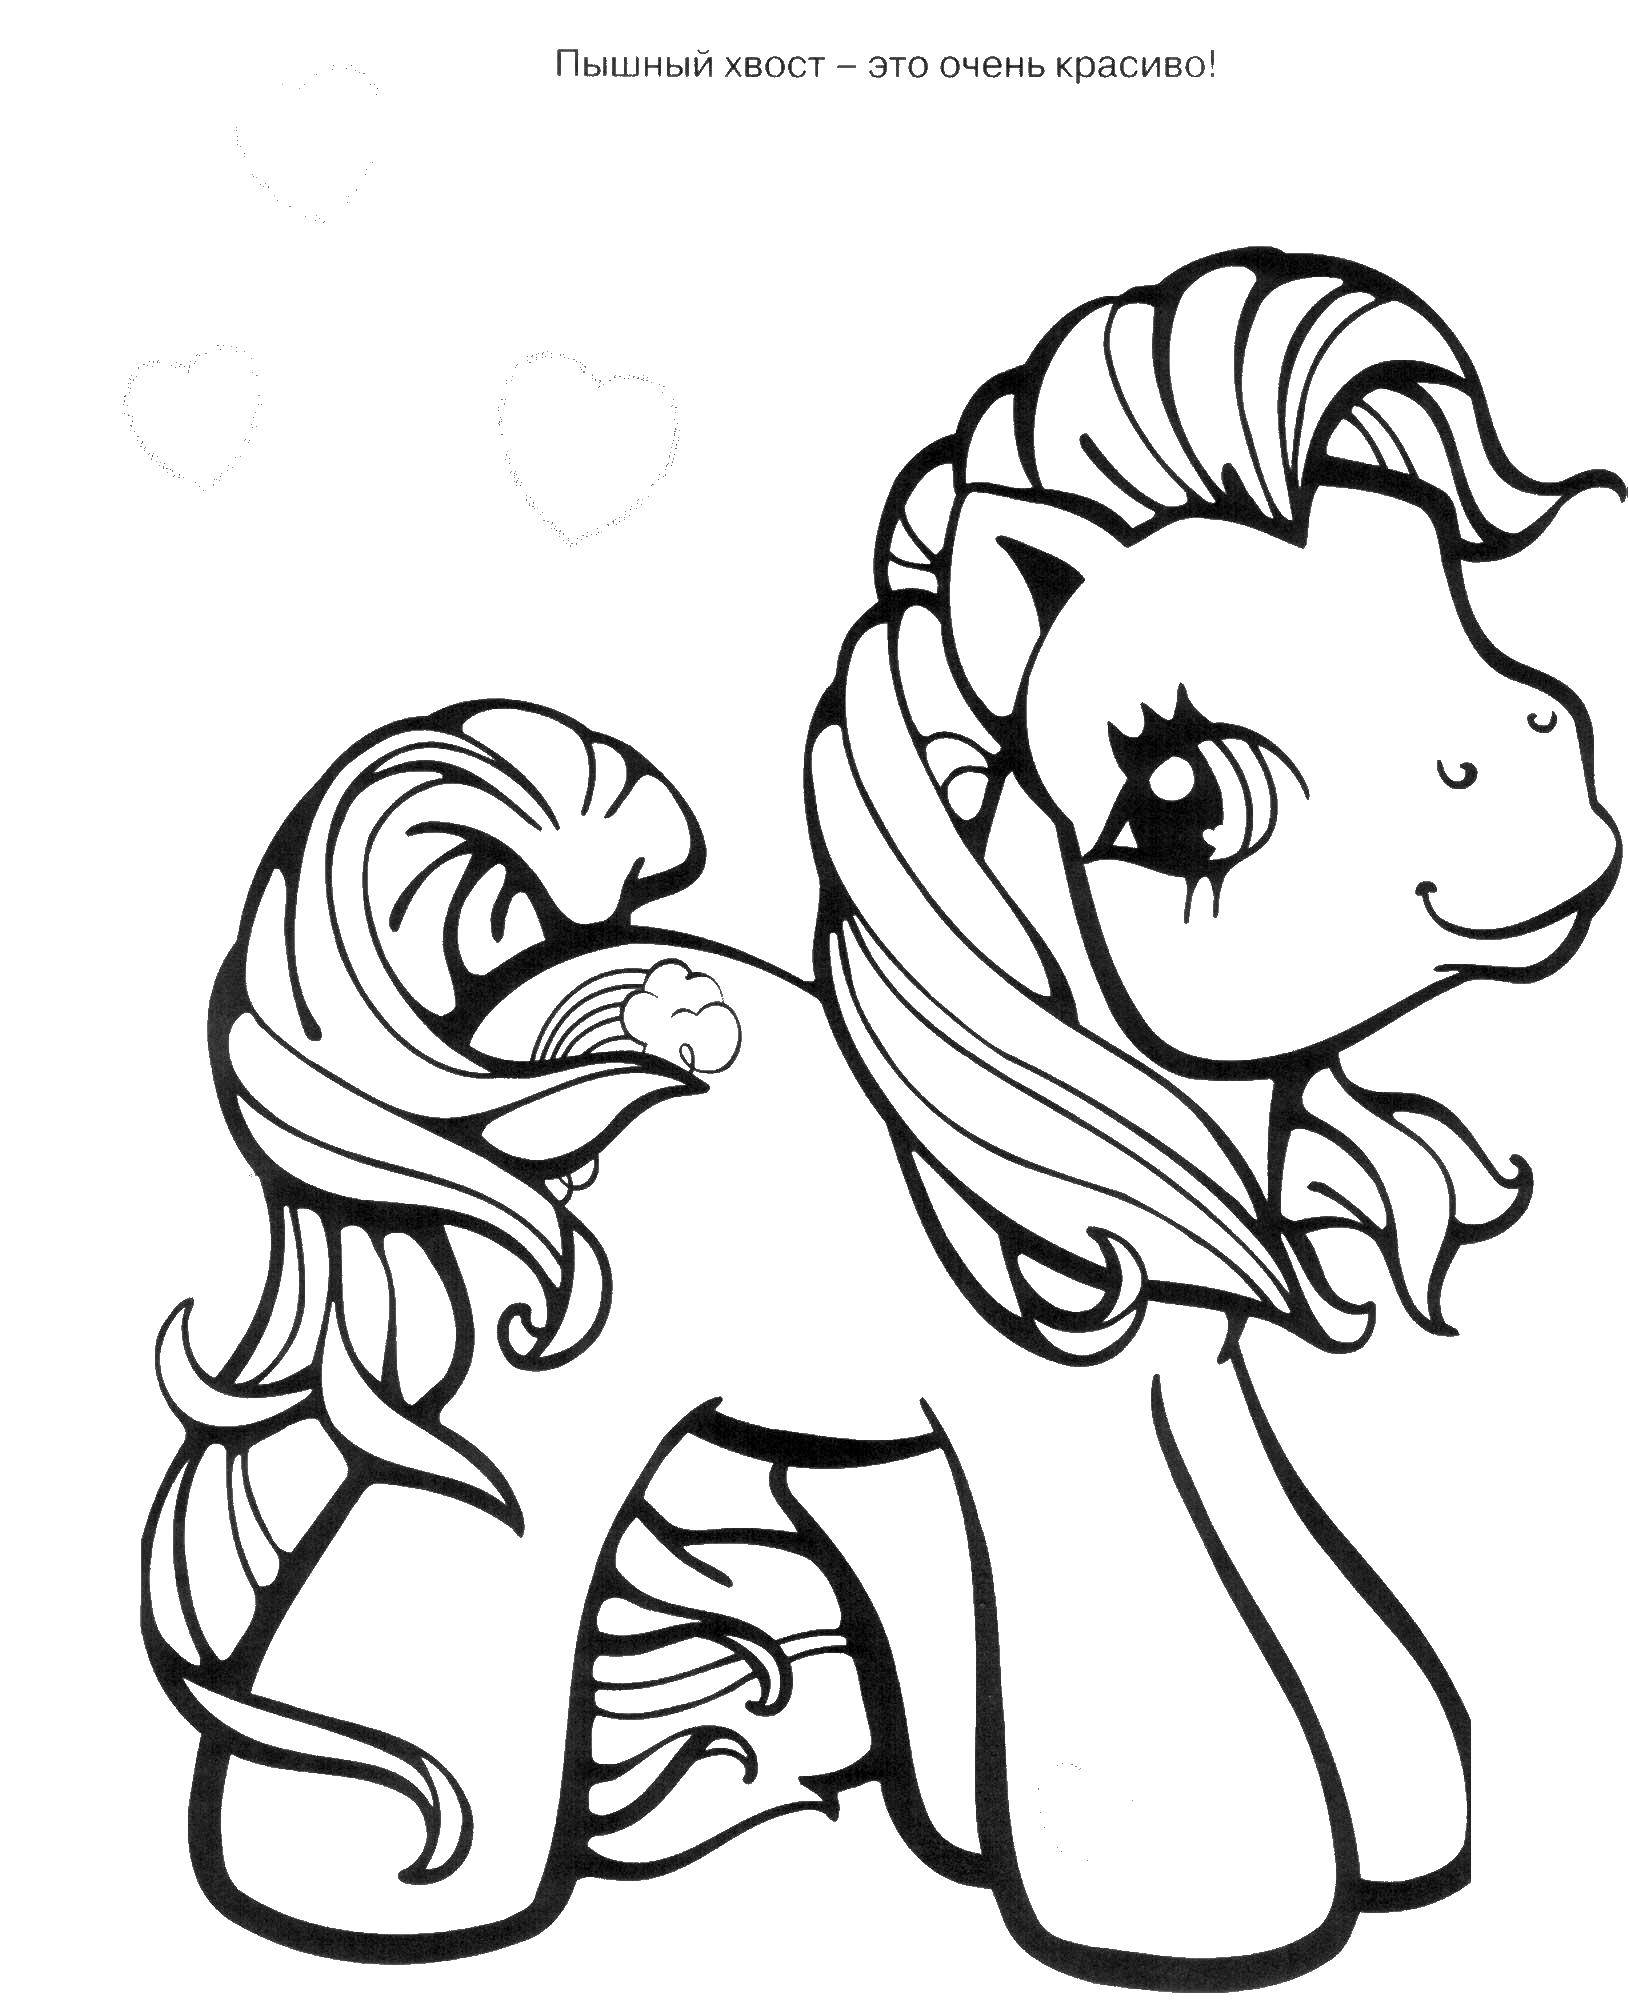 Coloring Pony. Category Ponies. Tags:  Ponies.